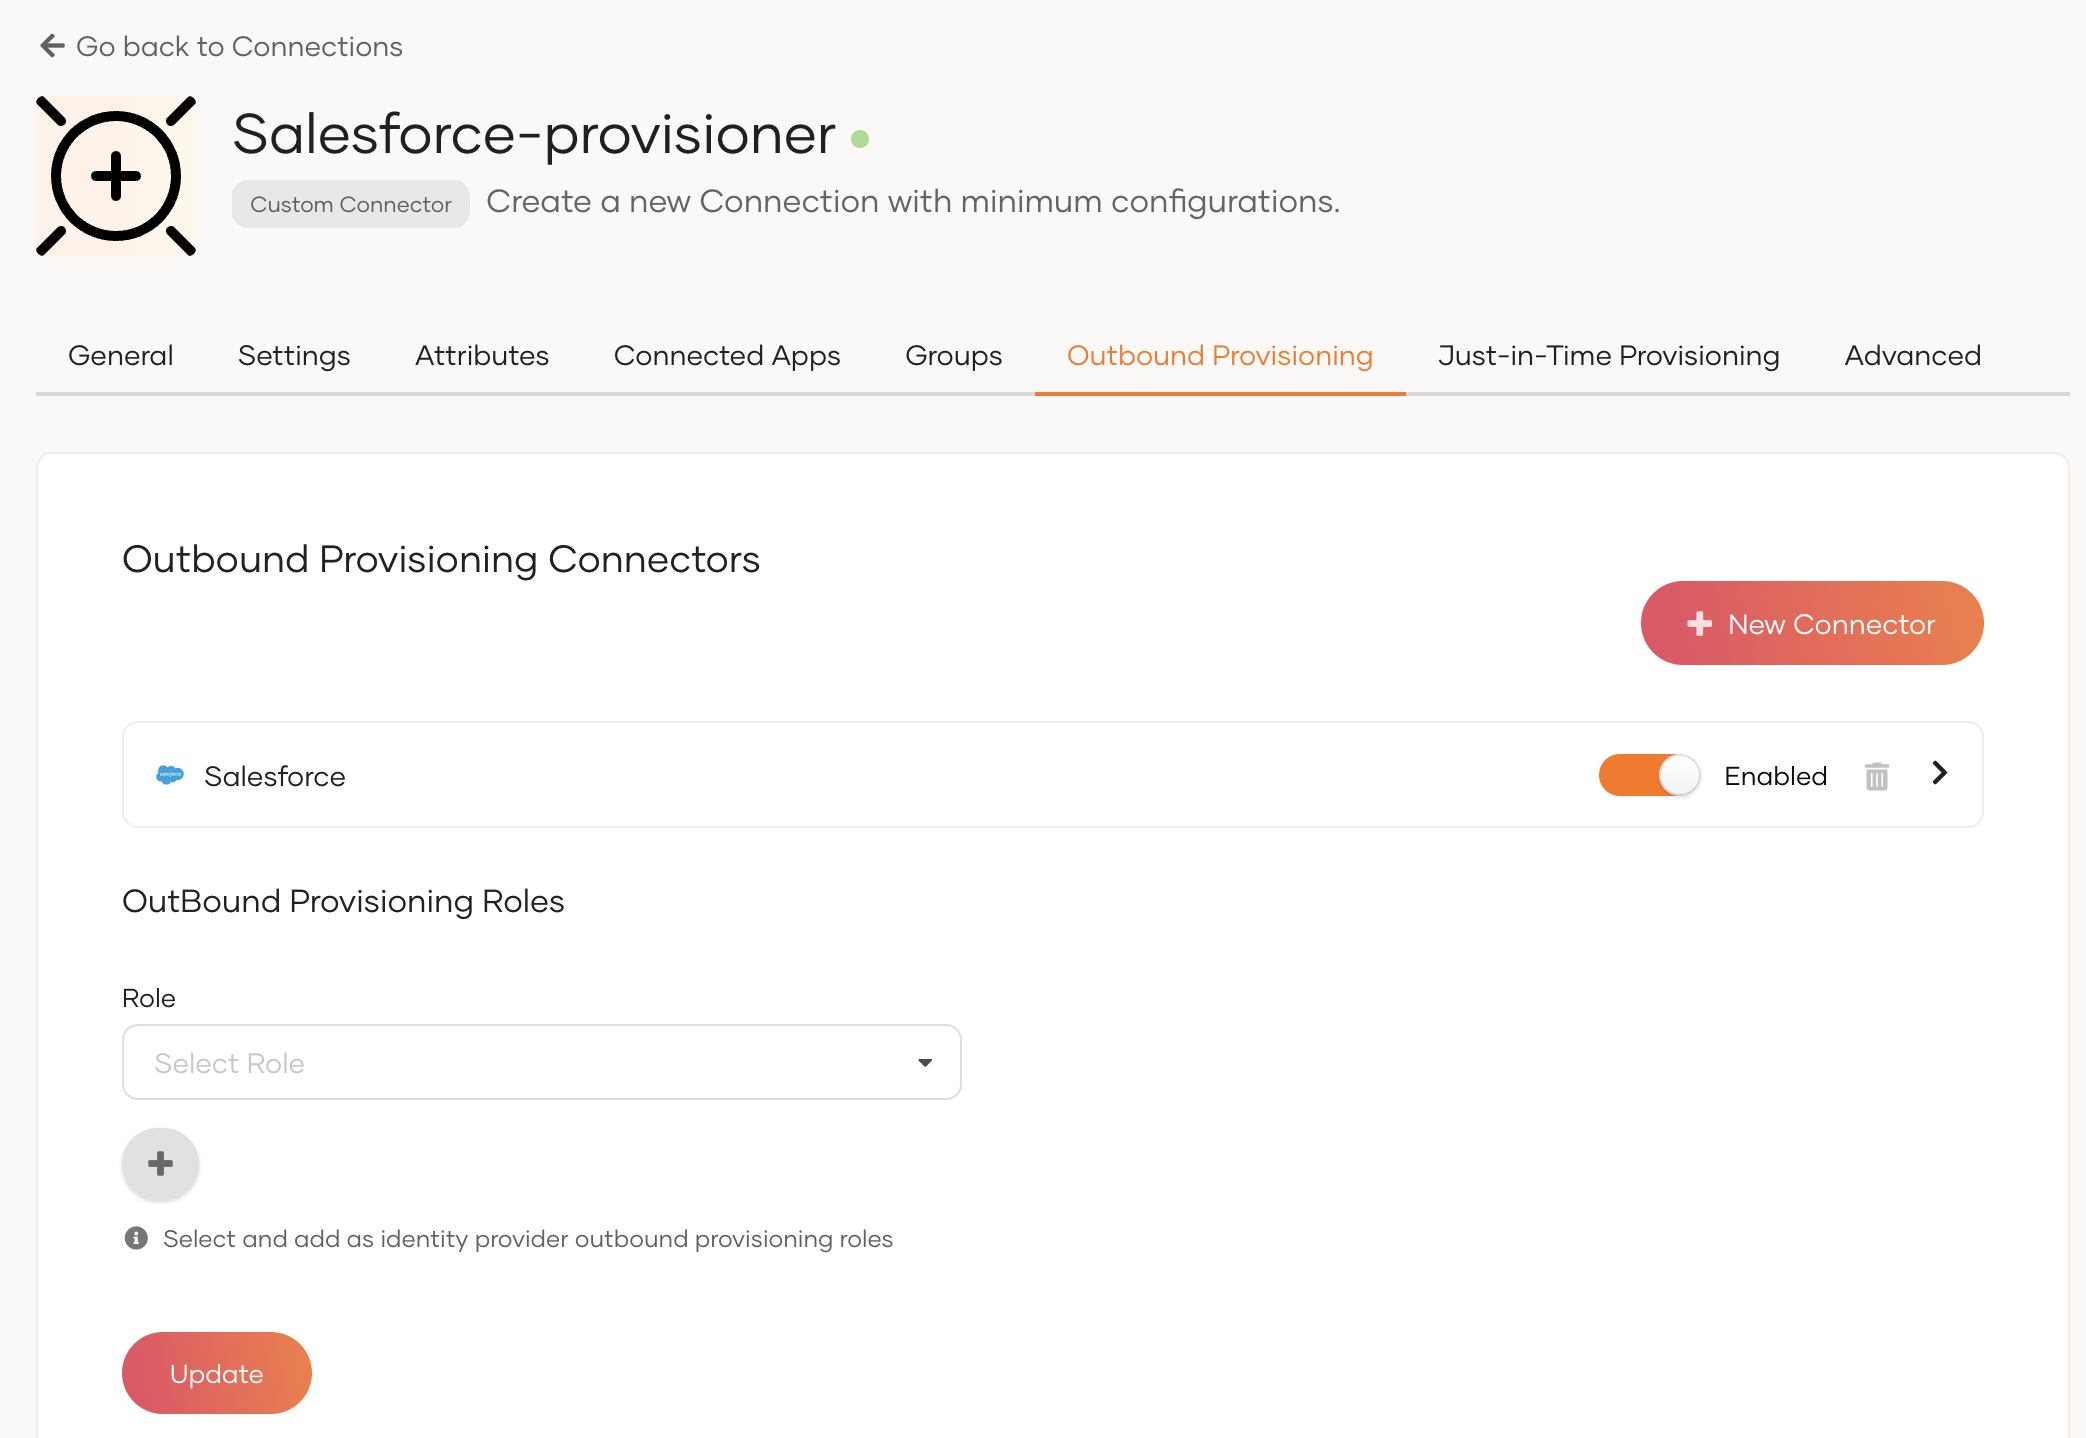 Enable outbound provisioner